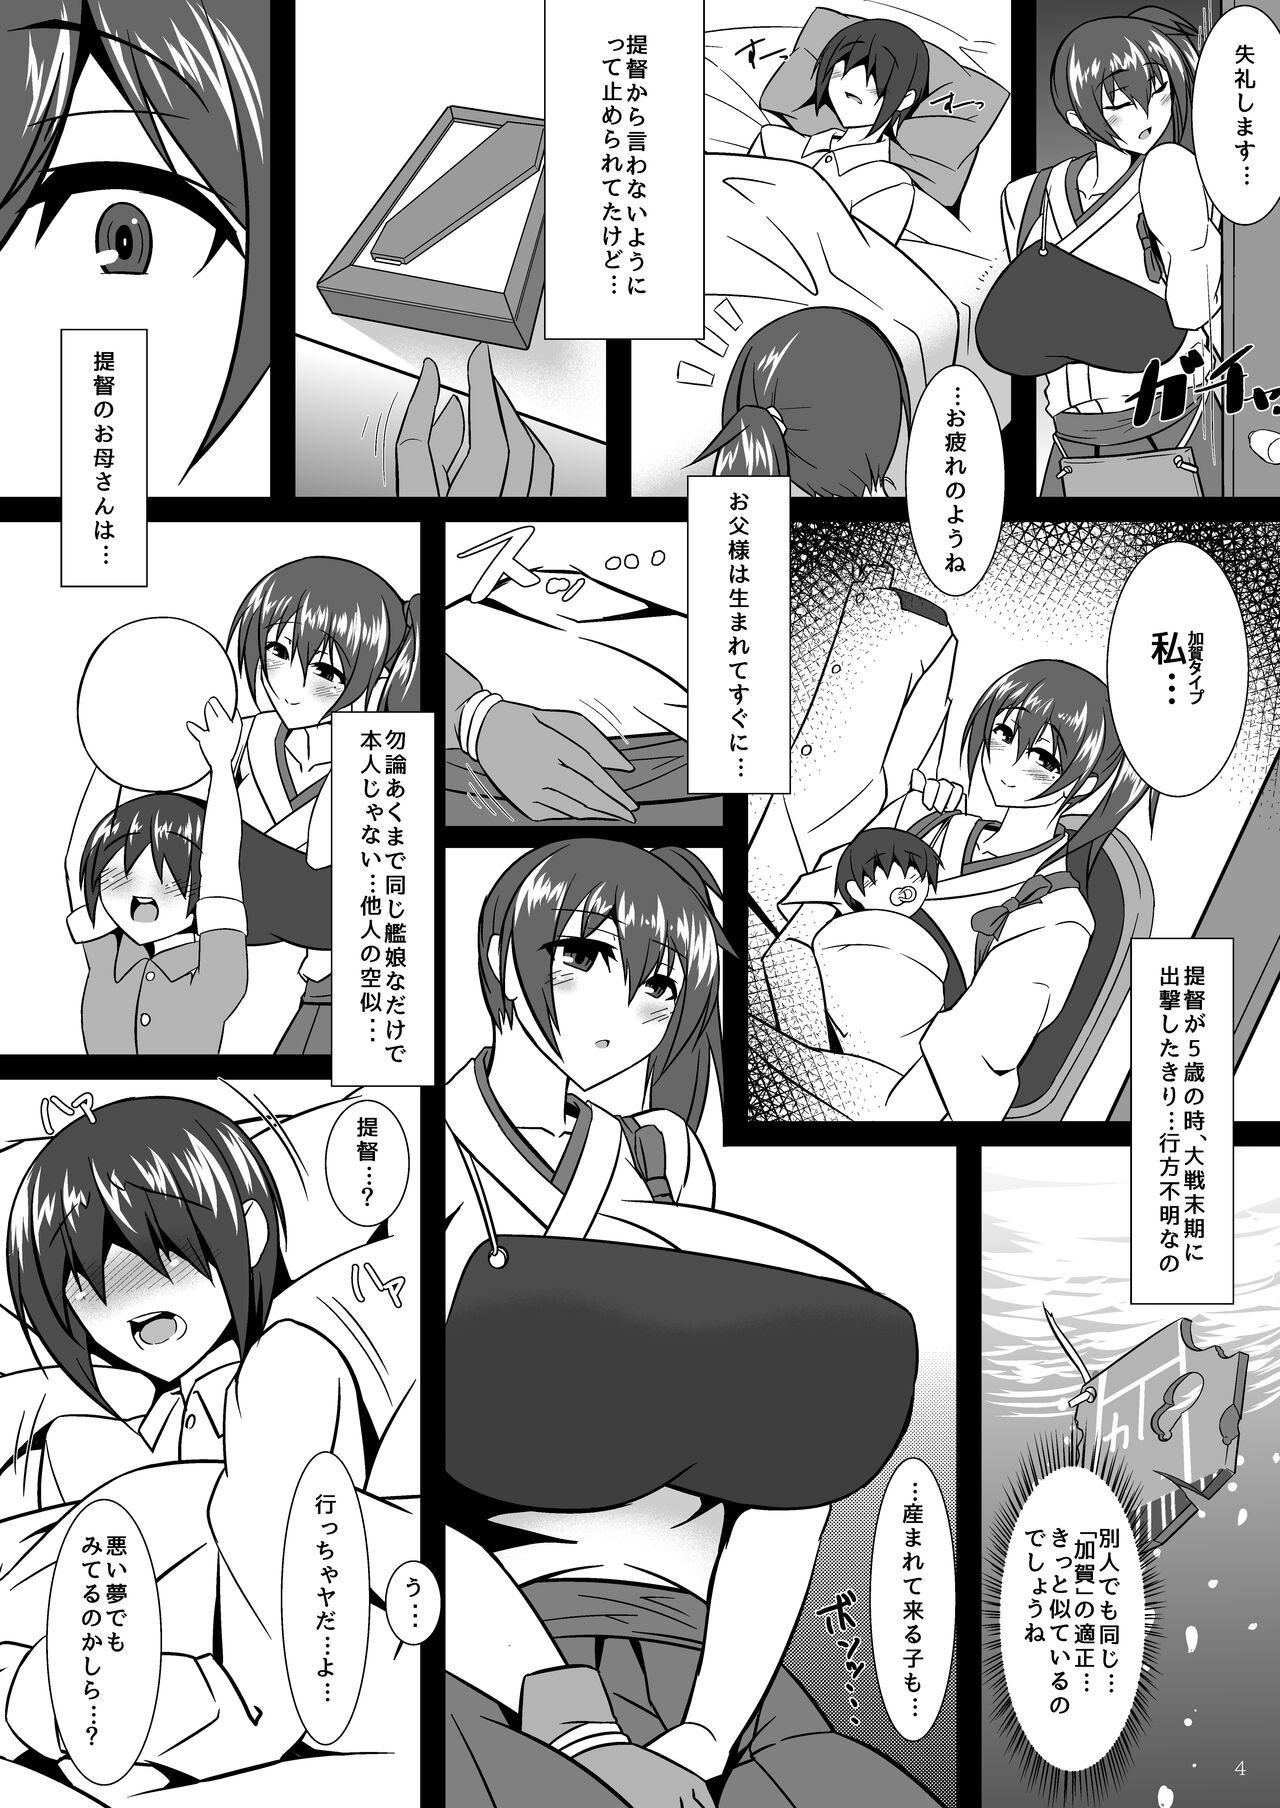 Leaked Bote Colle 4 - Kantai collection Free Blow Job - Page 4